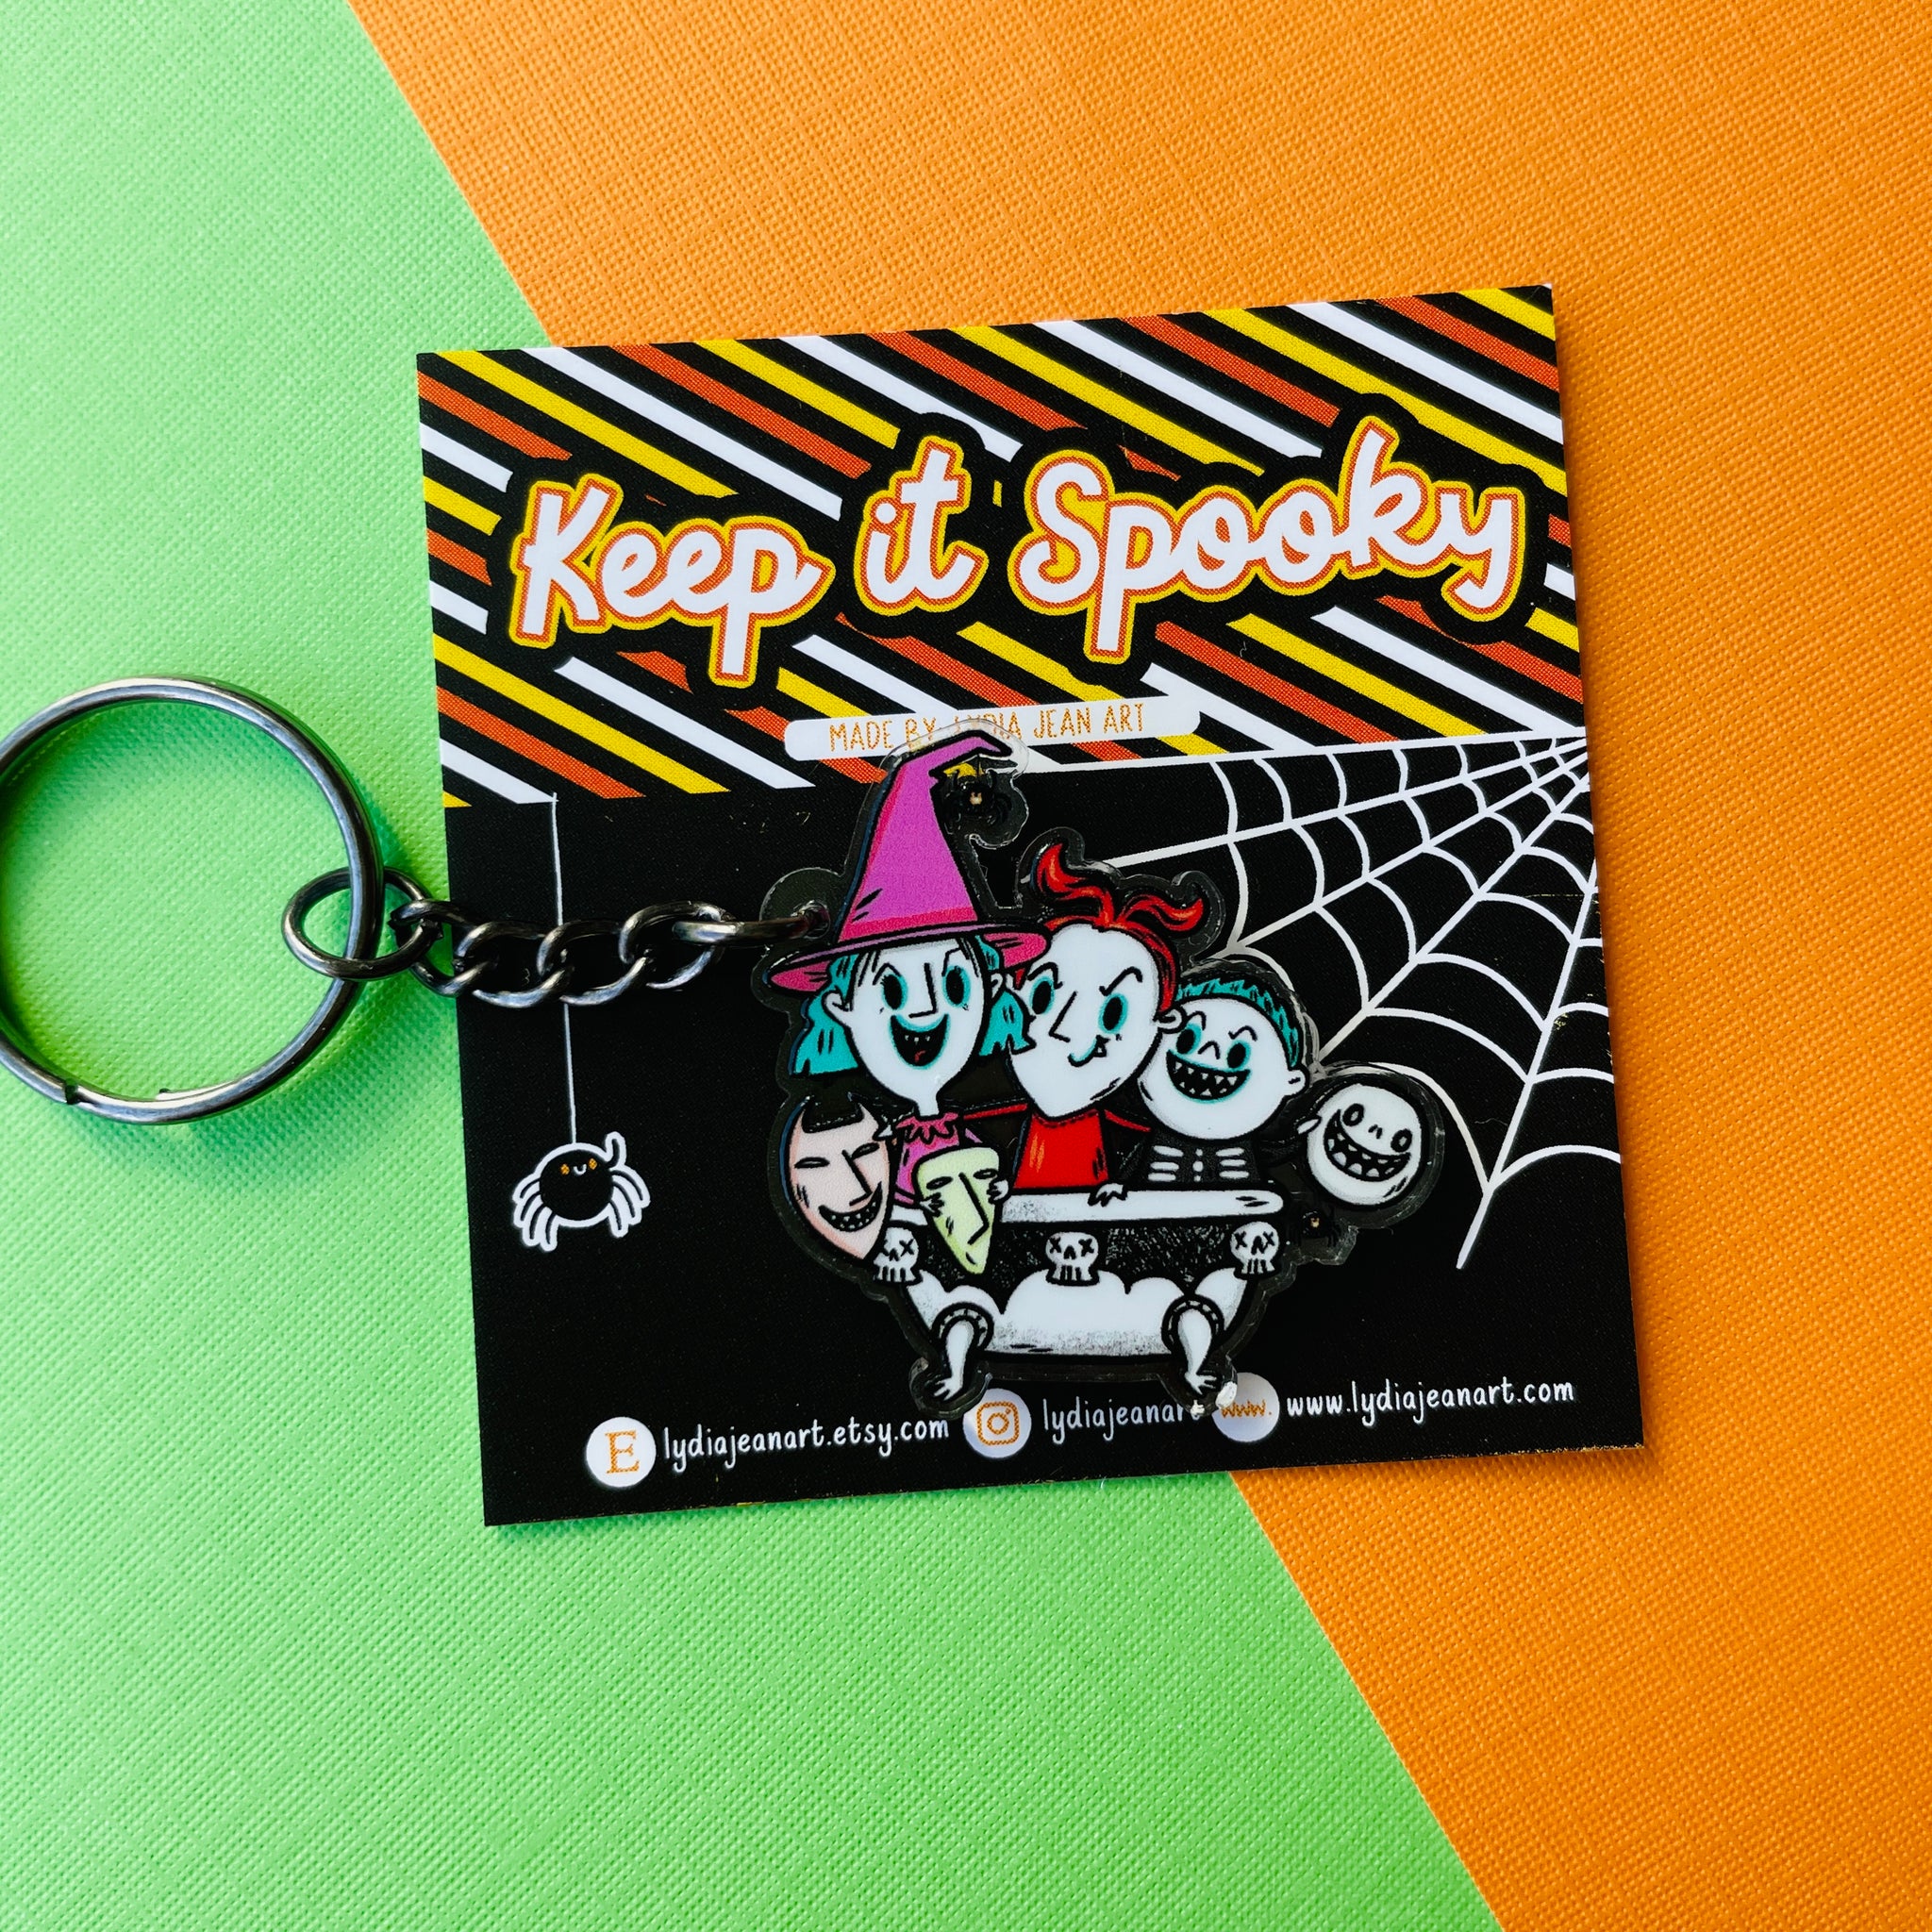 "The Trick or Treaters" Keychain